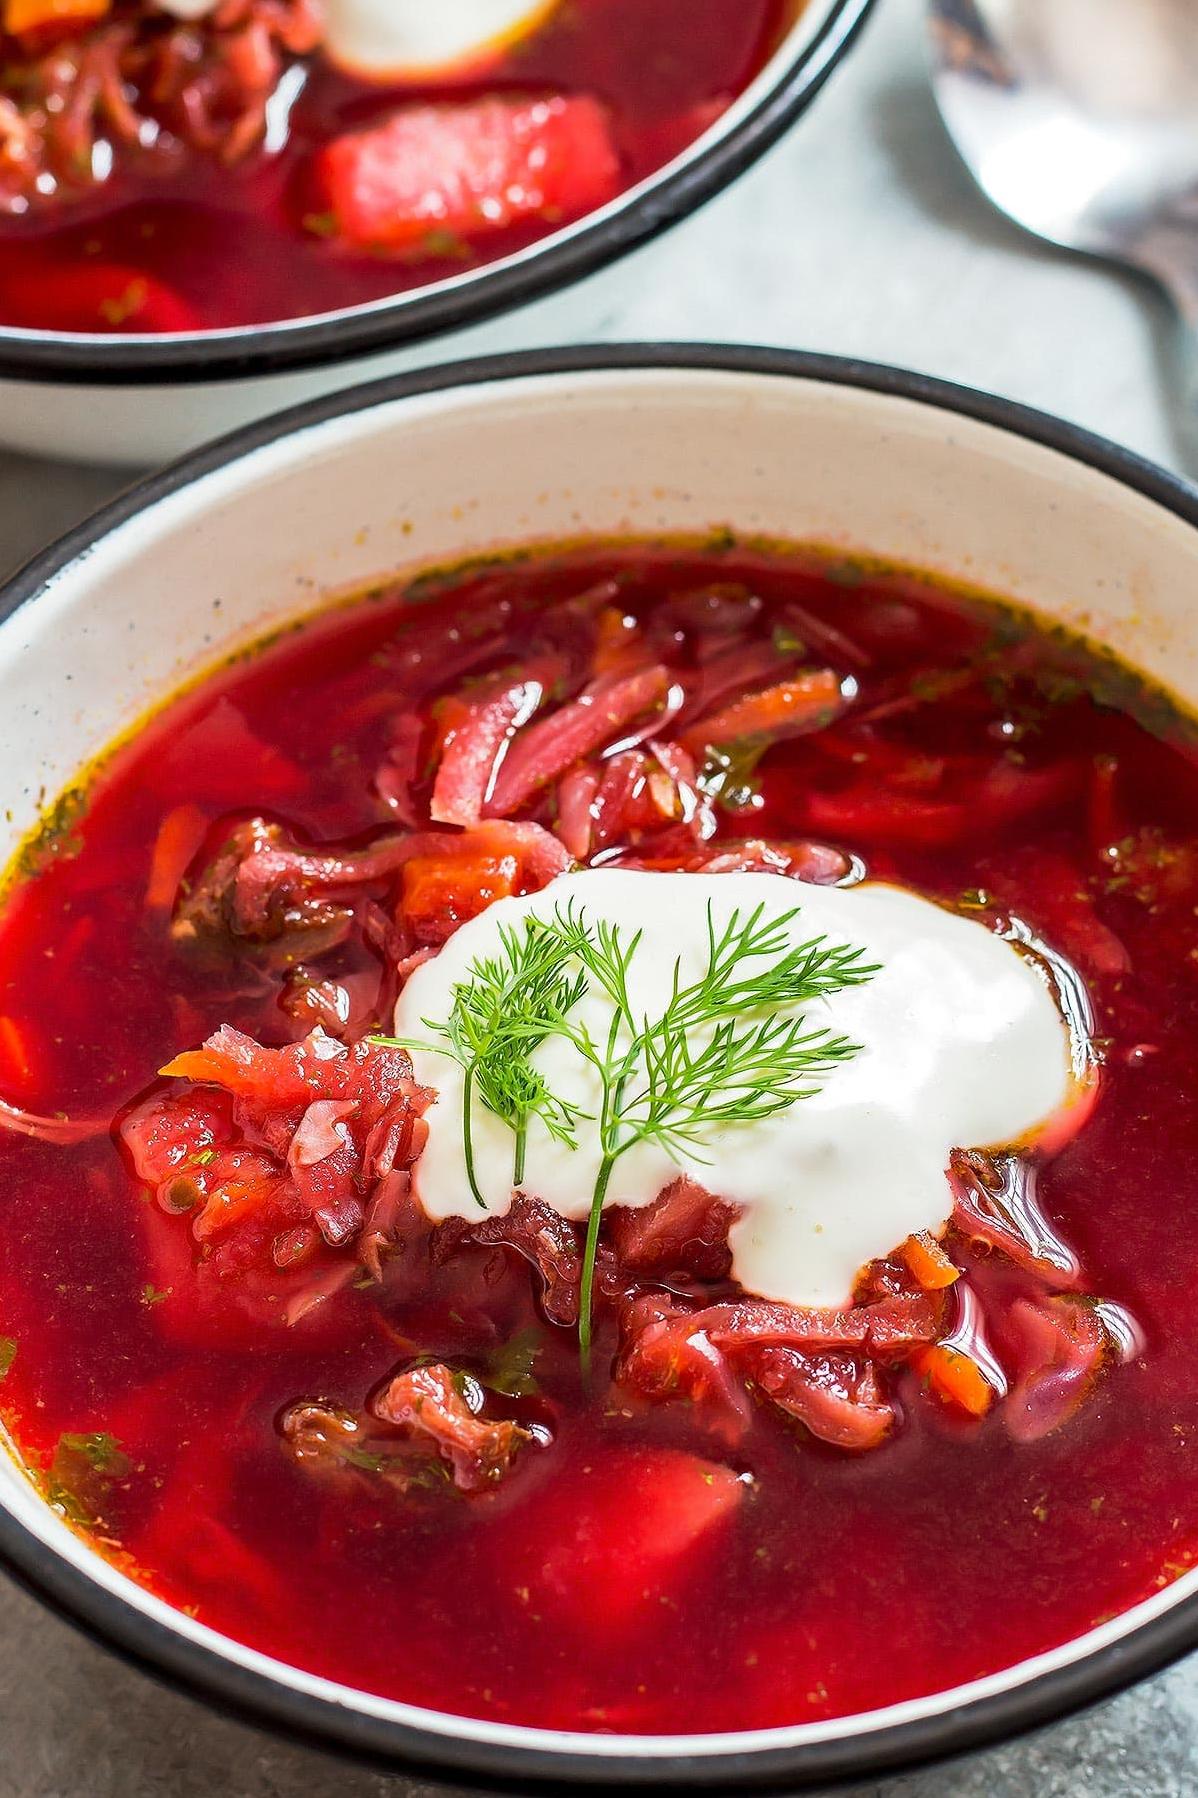  This soup might be the brightest thing you eat all winter.